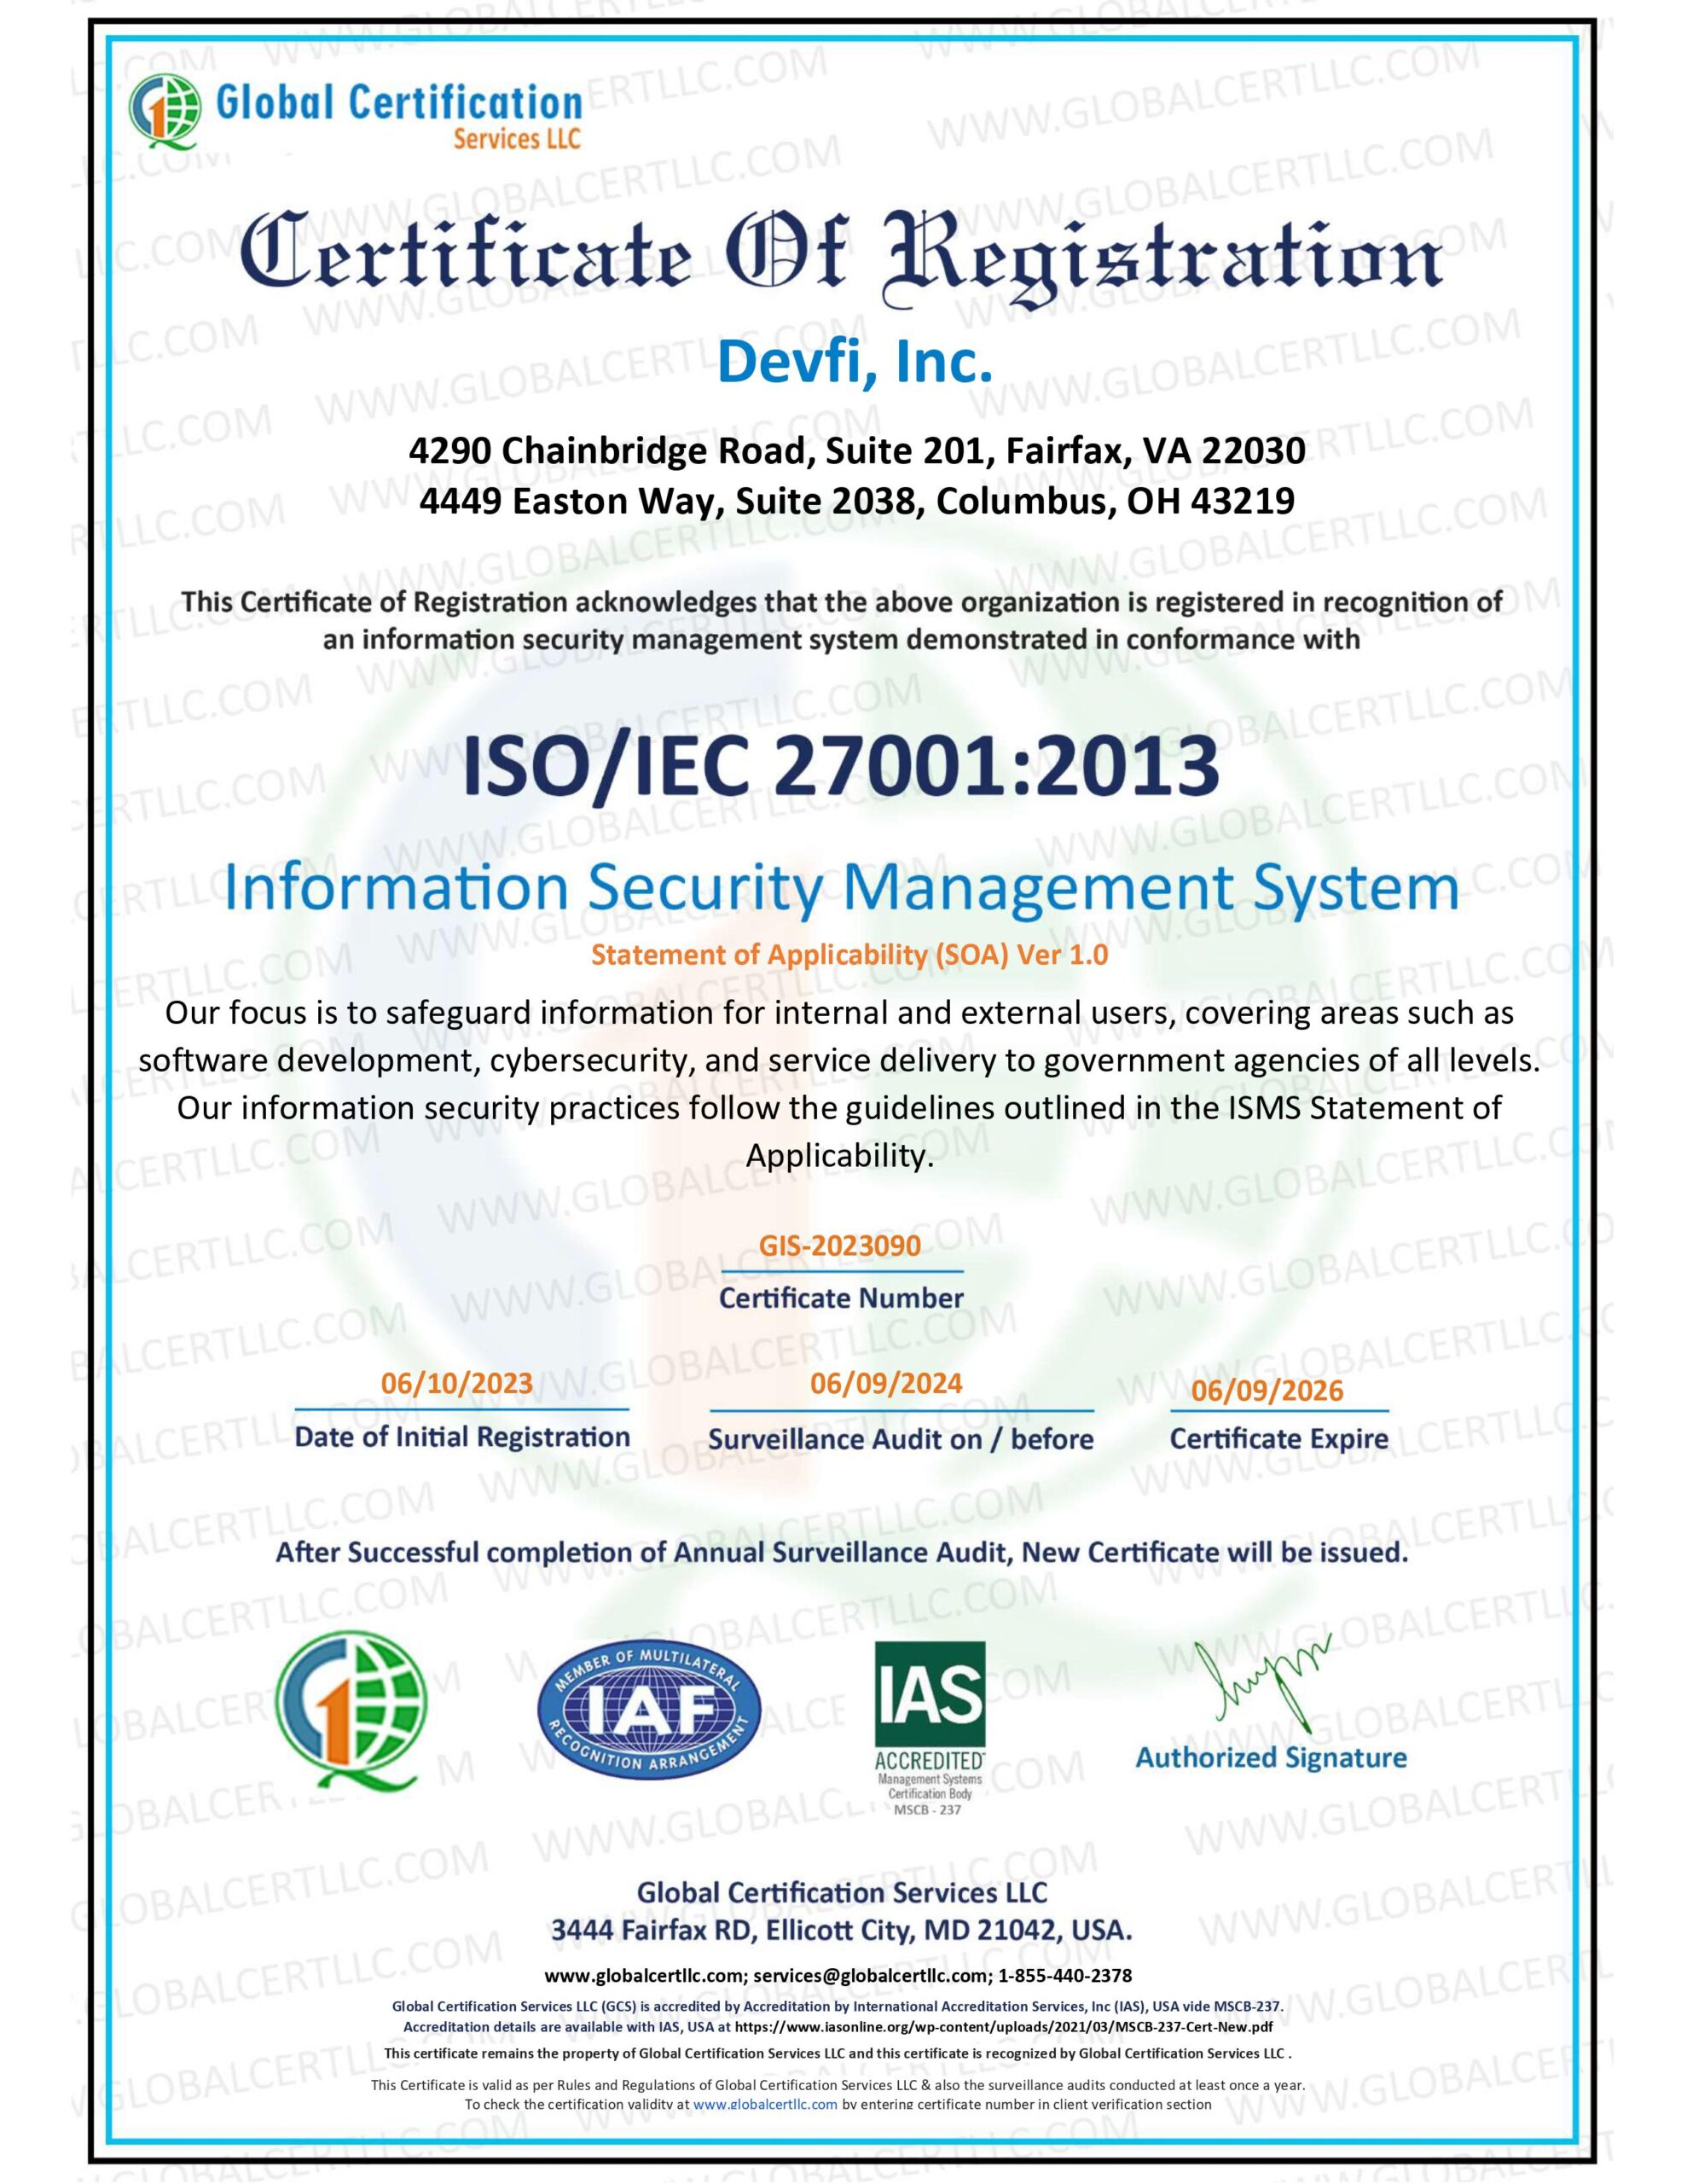 GIS-2023090 - ISO 27001 Standards Certificate